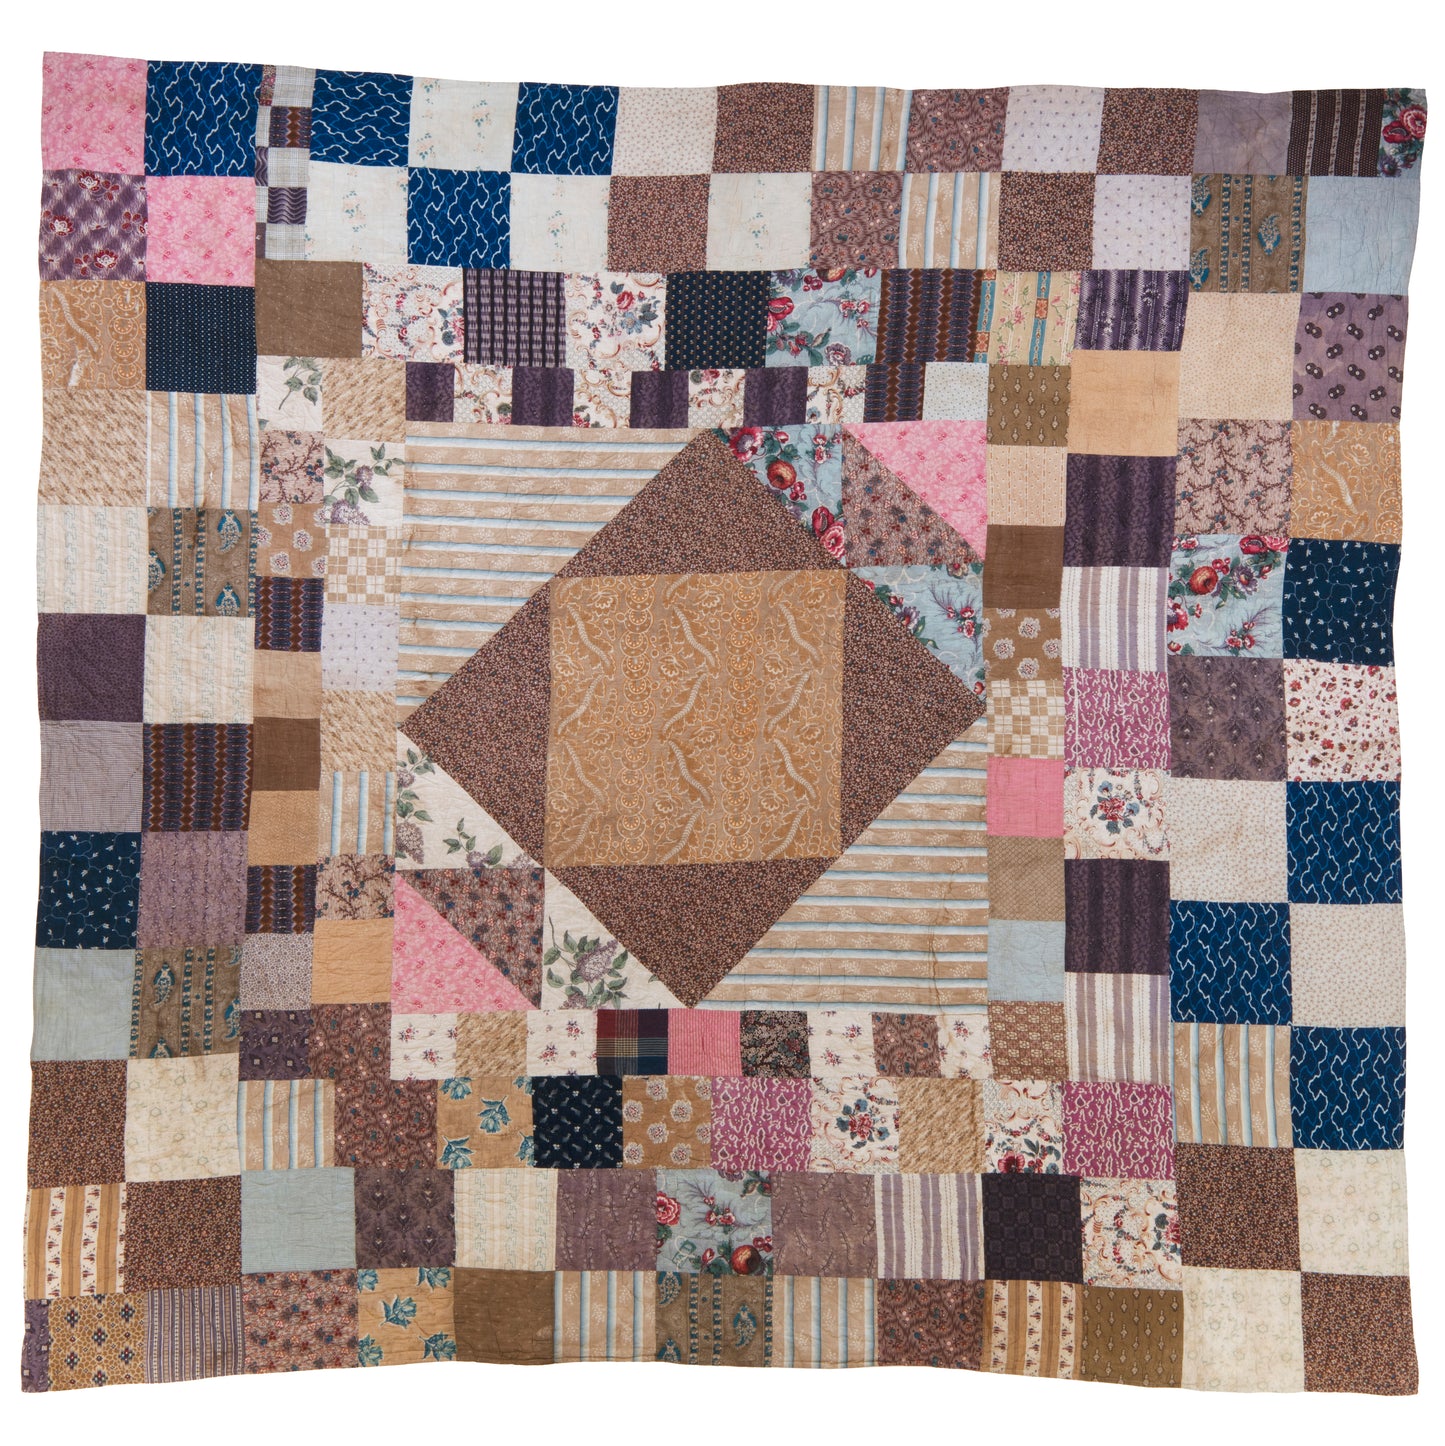 Quilting with Mandy Pattullo, Dorothy Osler, Joanna Hashagen, Abigail Booth and The Quilters' Guild